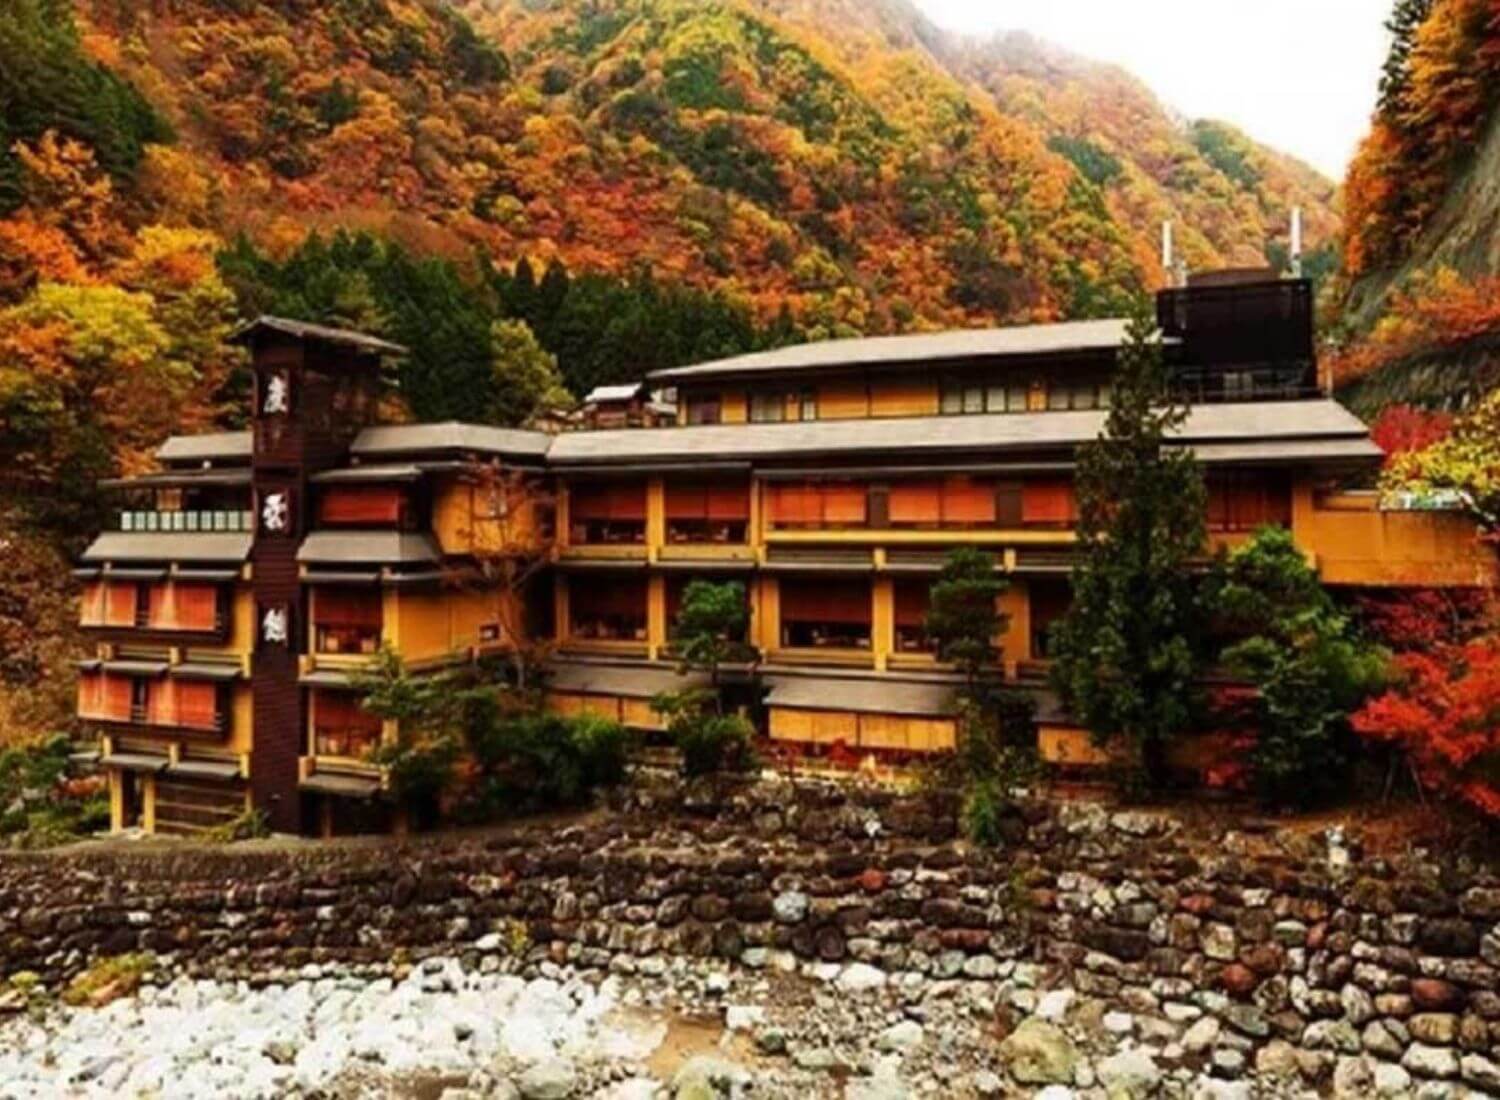 The World’s Oldest Hotel: The 1,200 Years Old Hot Spring Hotel Of Honshu